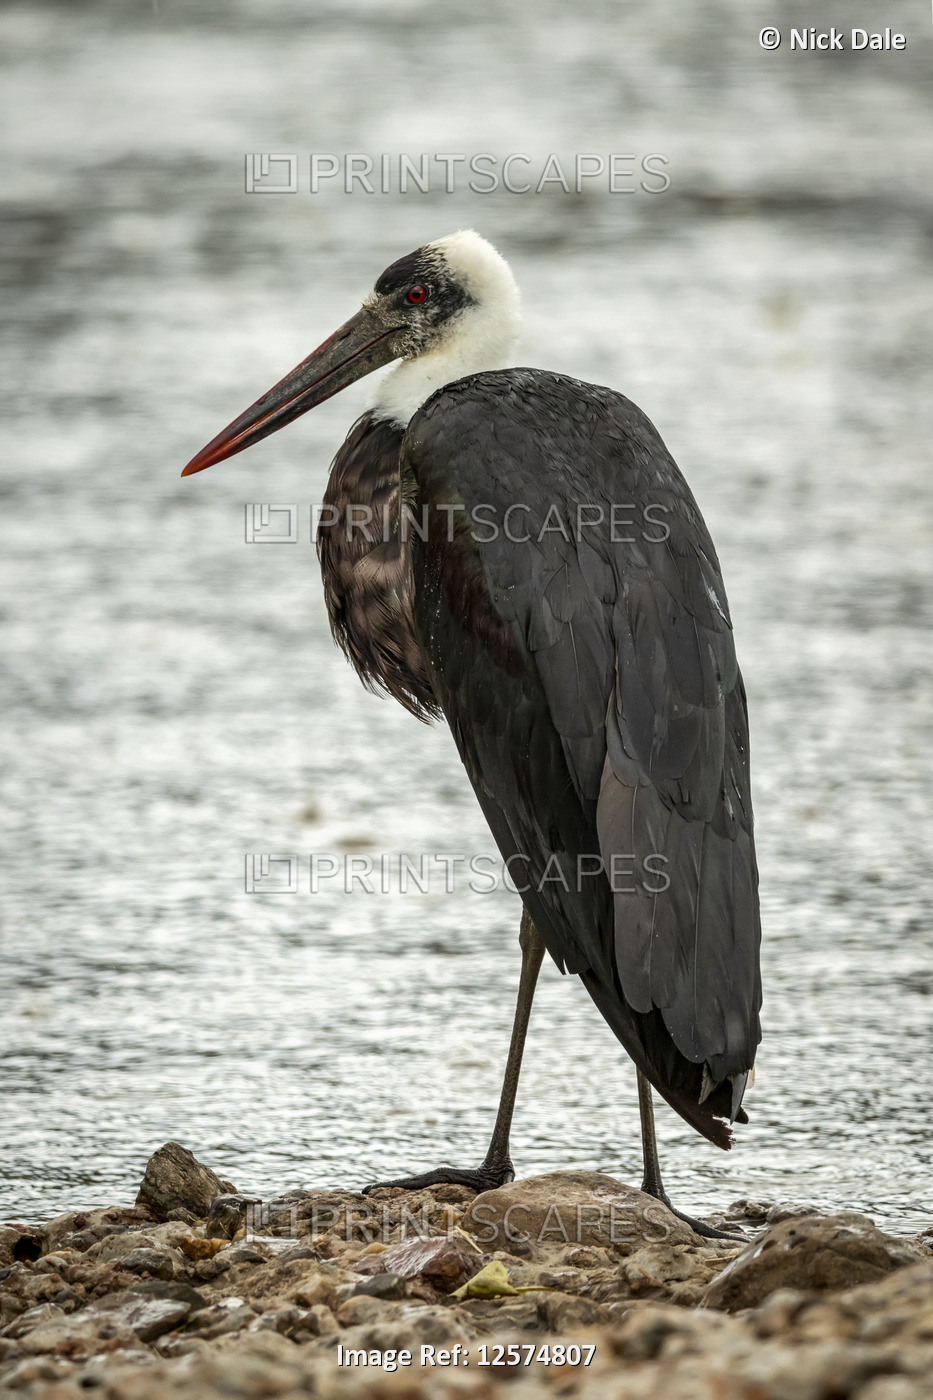 Woolly-necked stork (Ciconia episcopus) stands on shingle by river, Grumeti ...